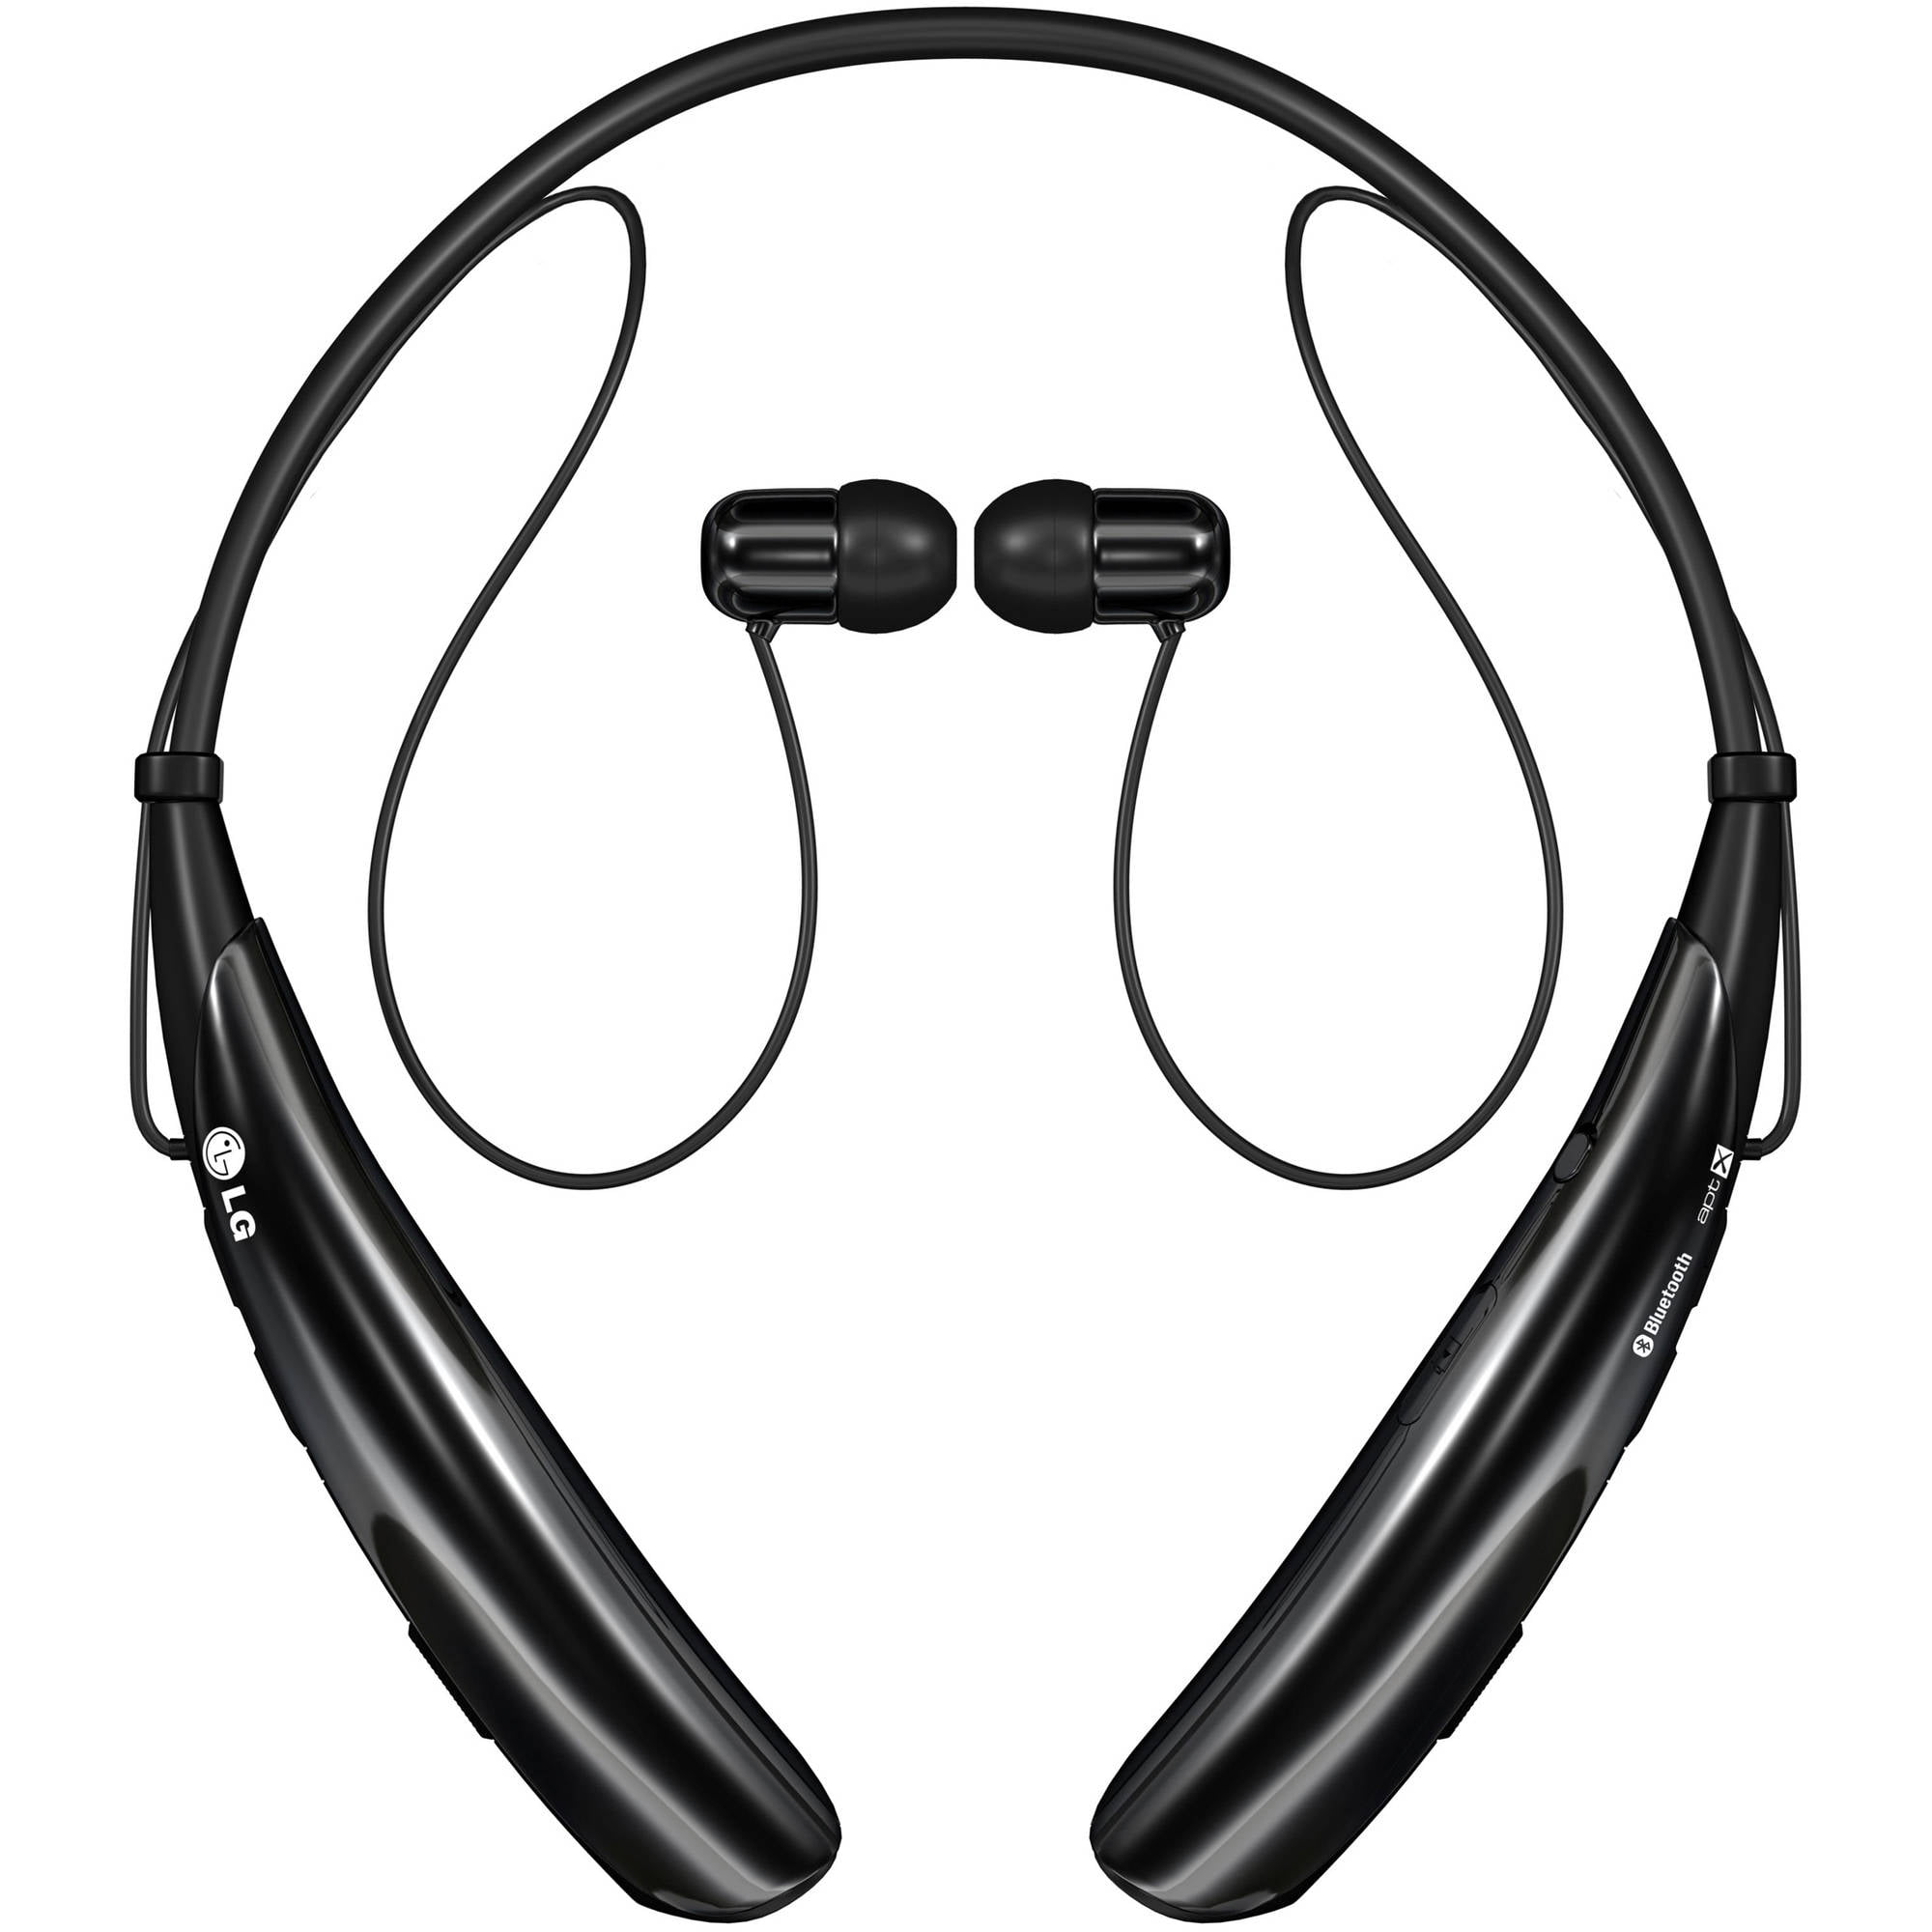 What are the top five Bluetooth headsets?